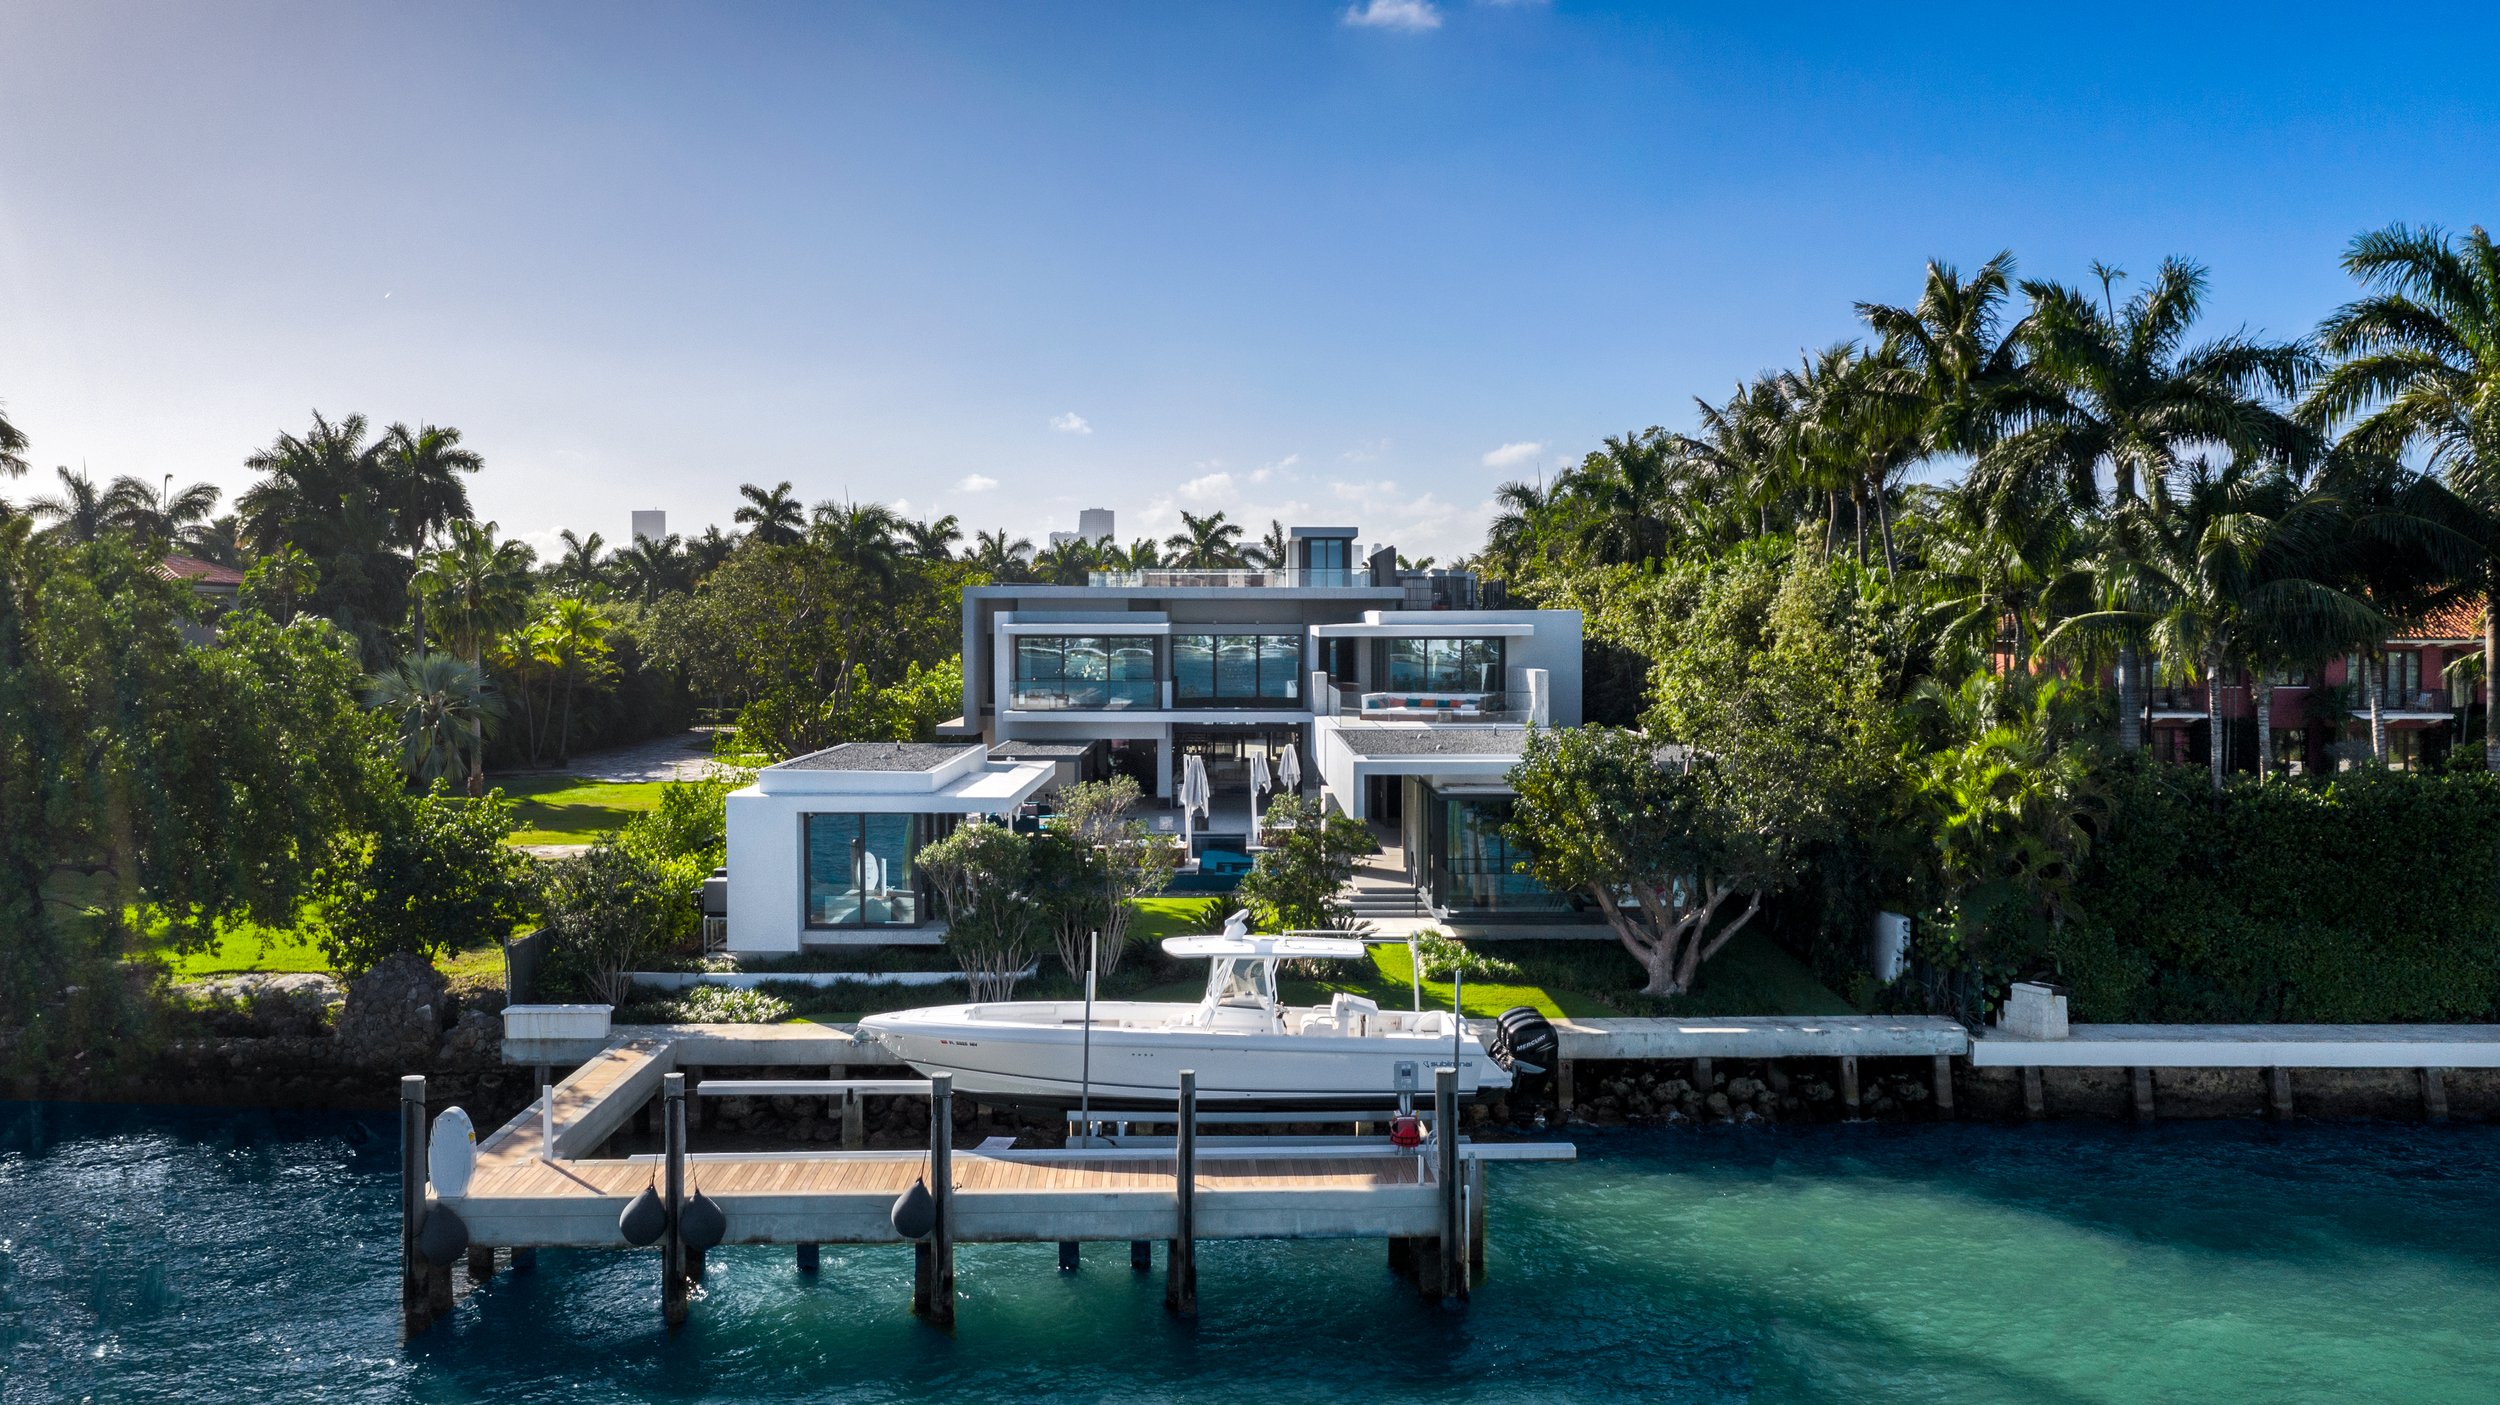 The+First+Estate+Built+On+Star+Island+In+1924+Lists+For+Record+$90+Million+Following+Ultra-Luxe+Expansion